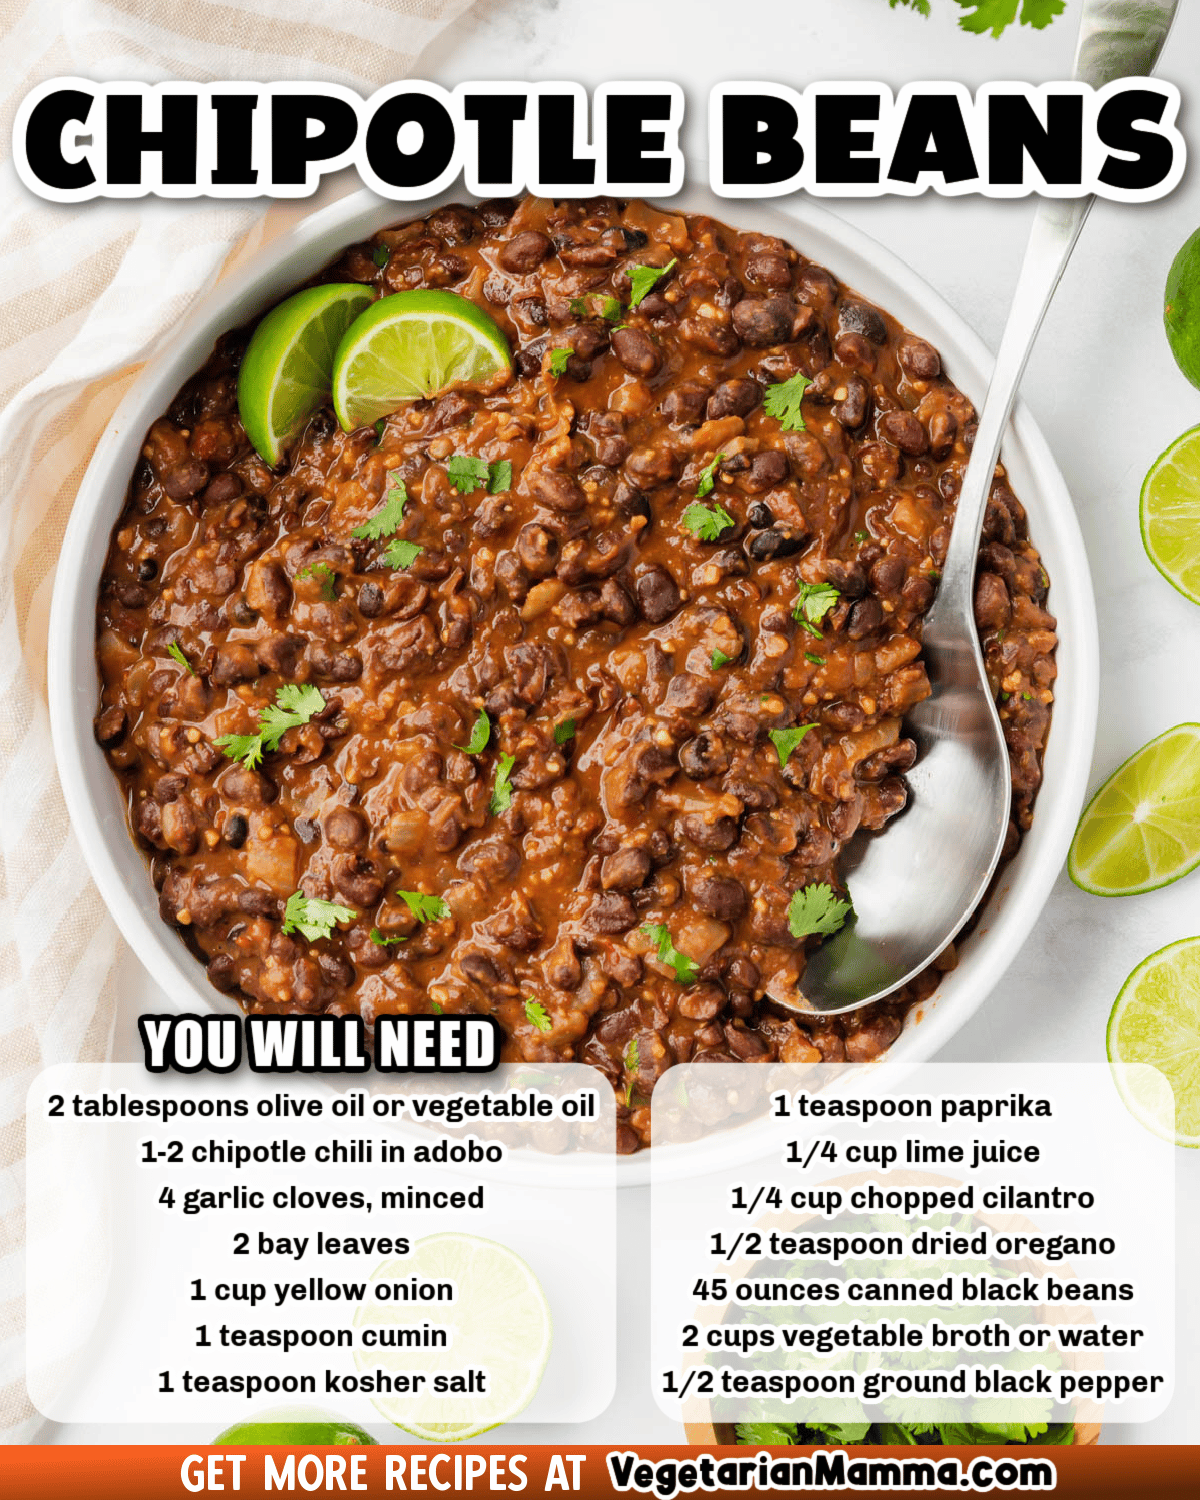 Seasoned Black Beans are a high-protein dish, perfect for making vegetarian tacos, burrito bowls, or eating with a spoon!